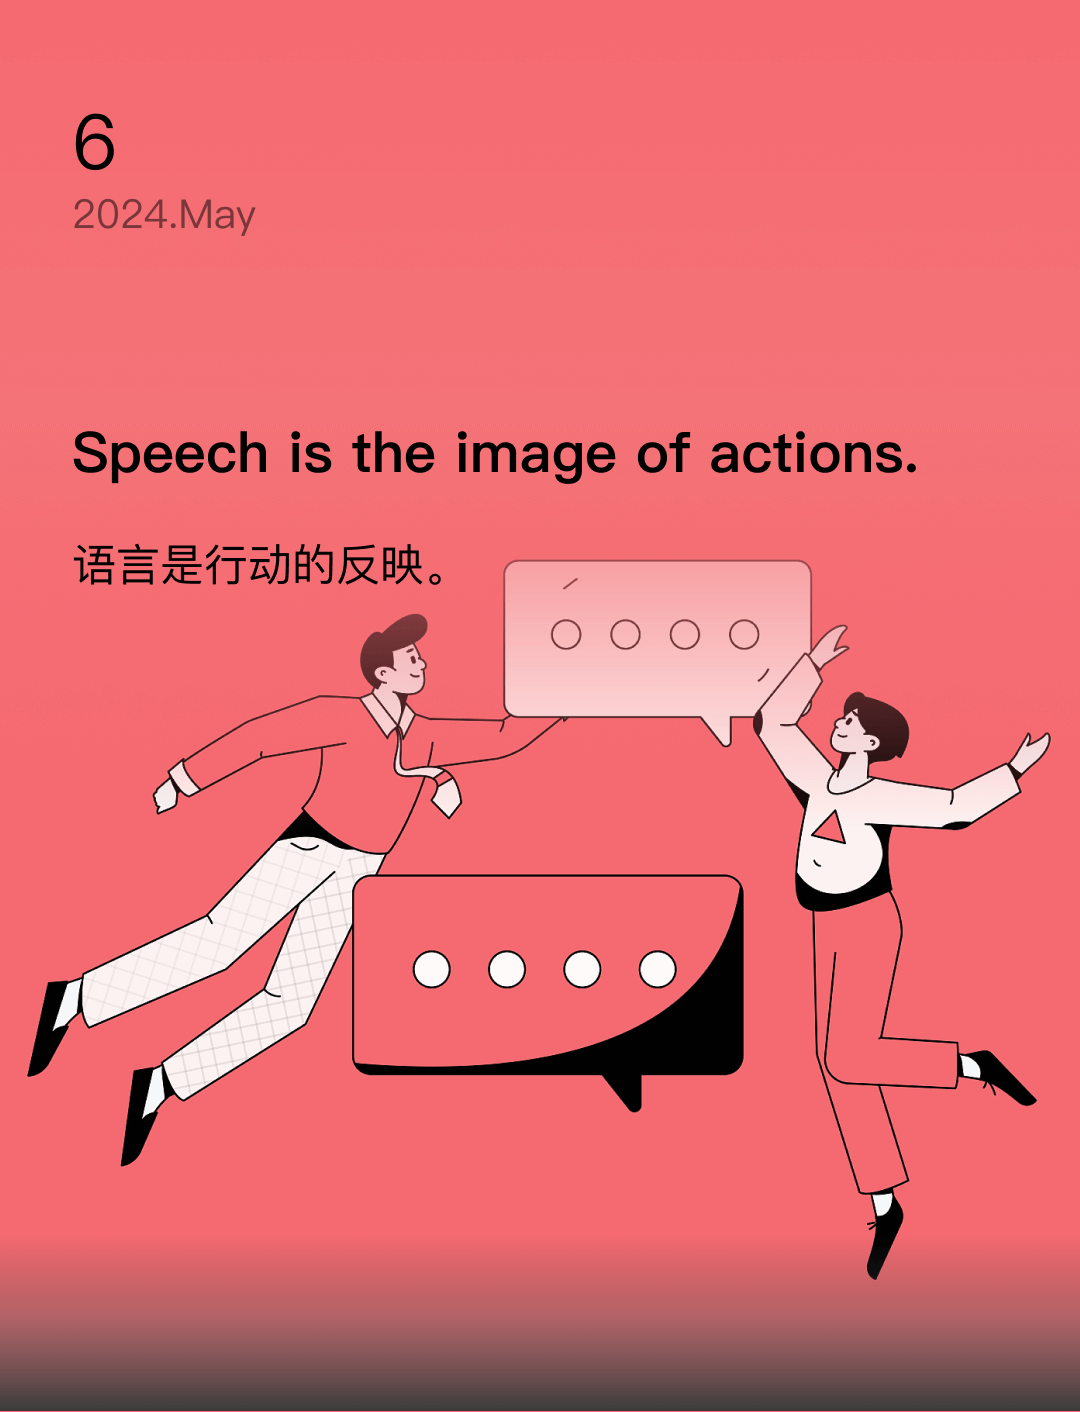 Speech is the image of actions.